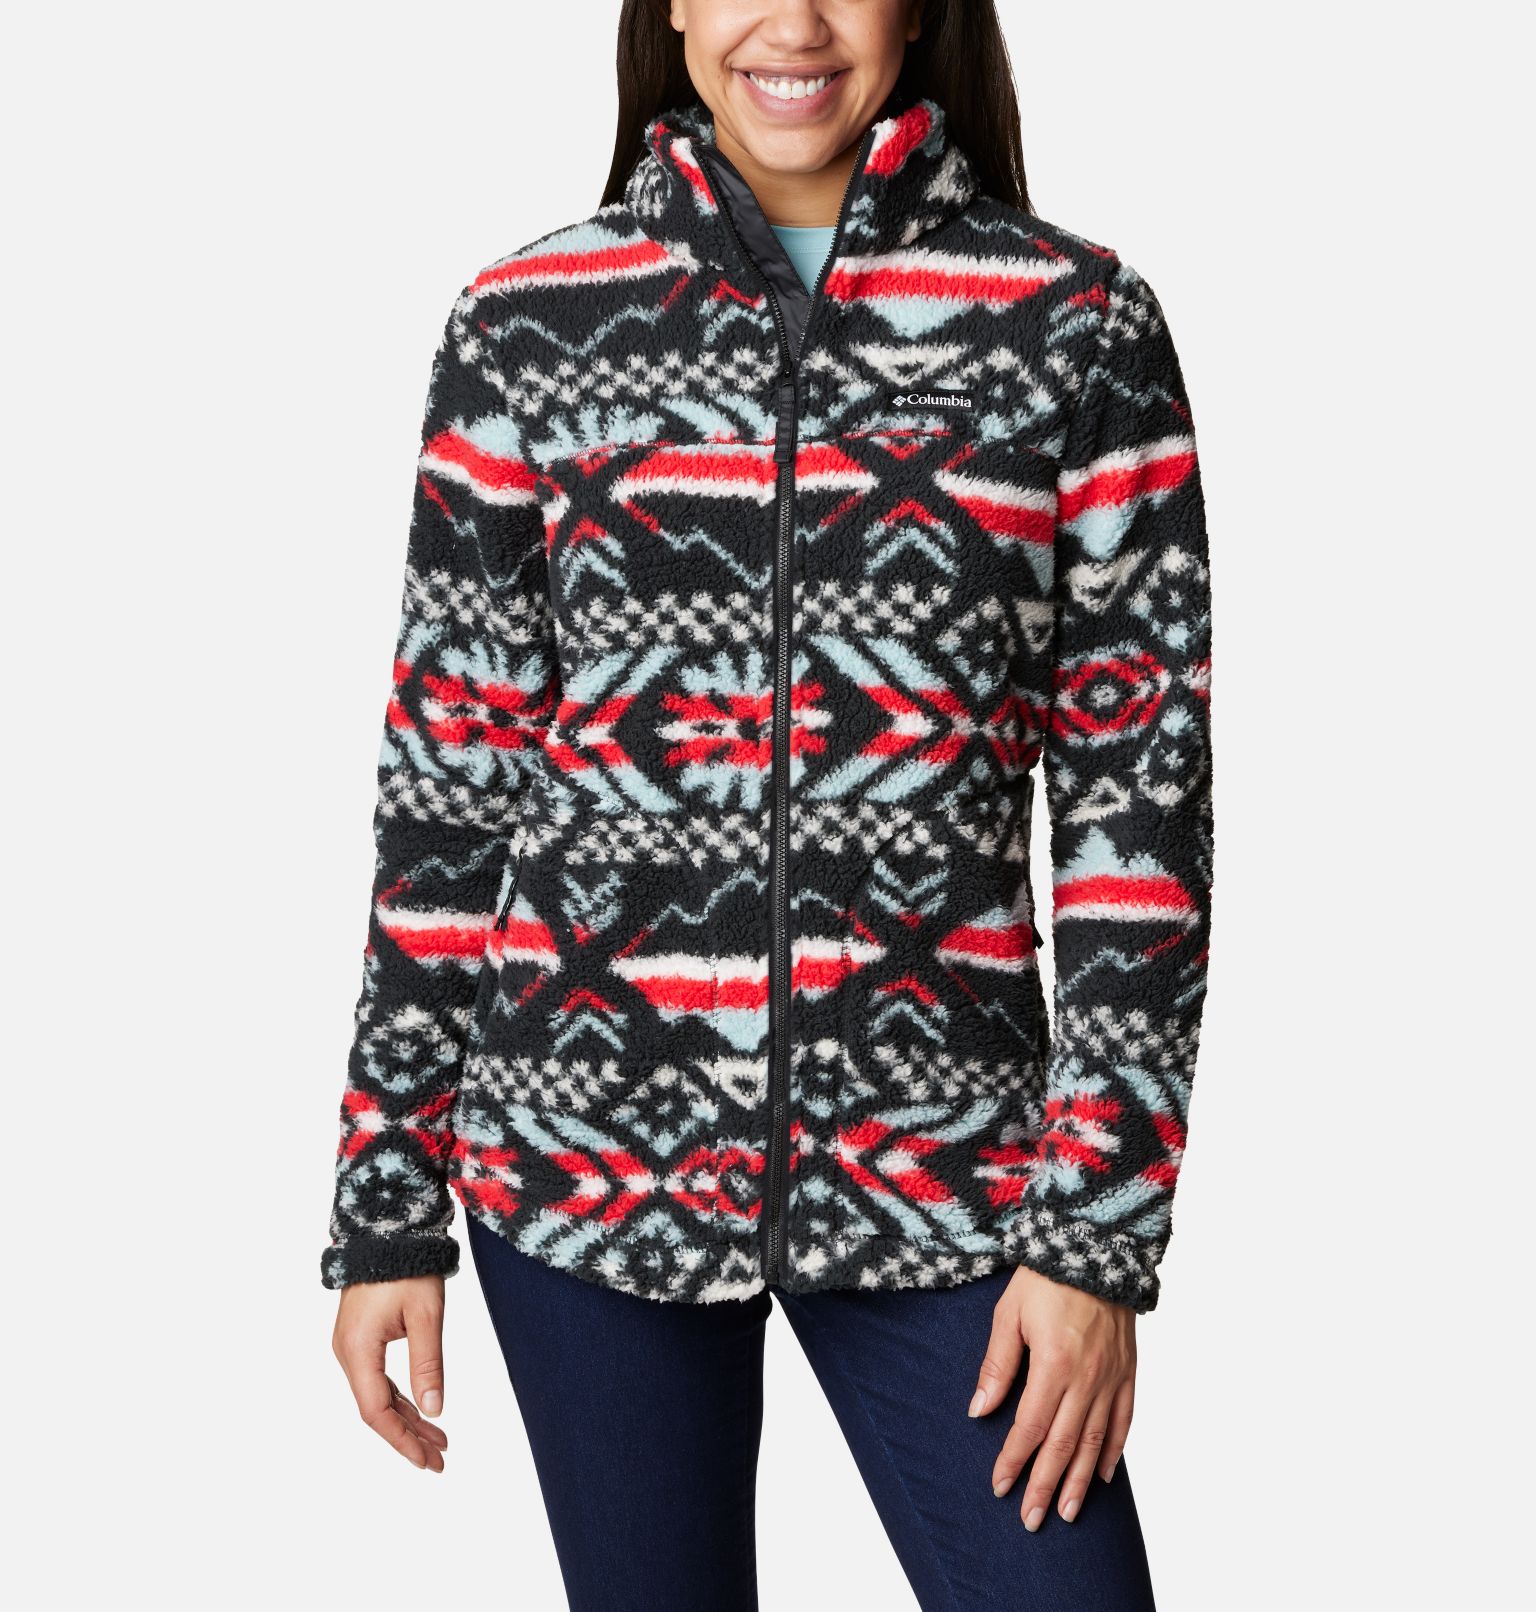 Columbia Extra 20% Off Sale: Women's West Bend Full Zip or Quarter Zip Jacket $25.20 & More + Free Shipping